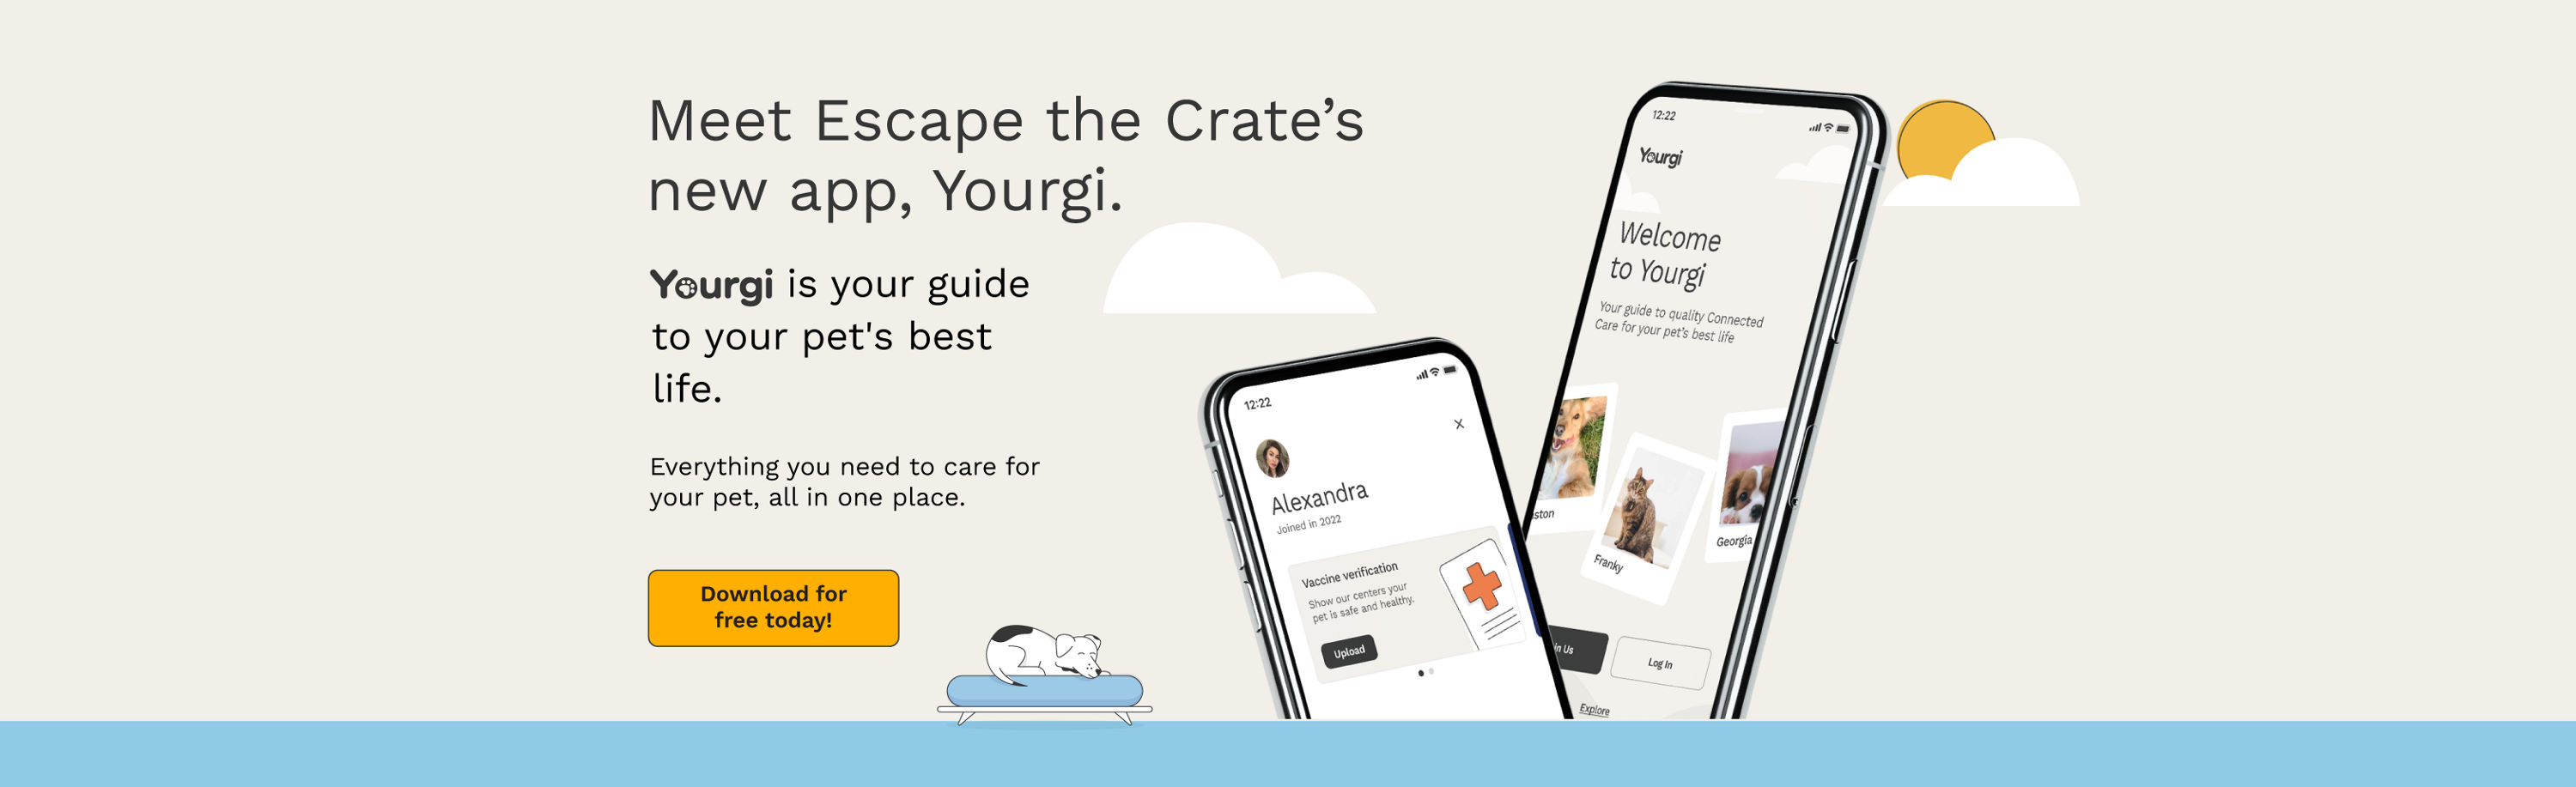 Meet Escape the Crate's new app, Yourgi.